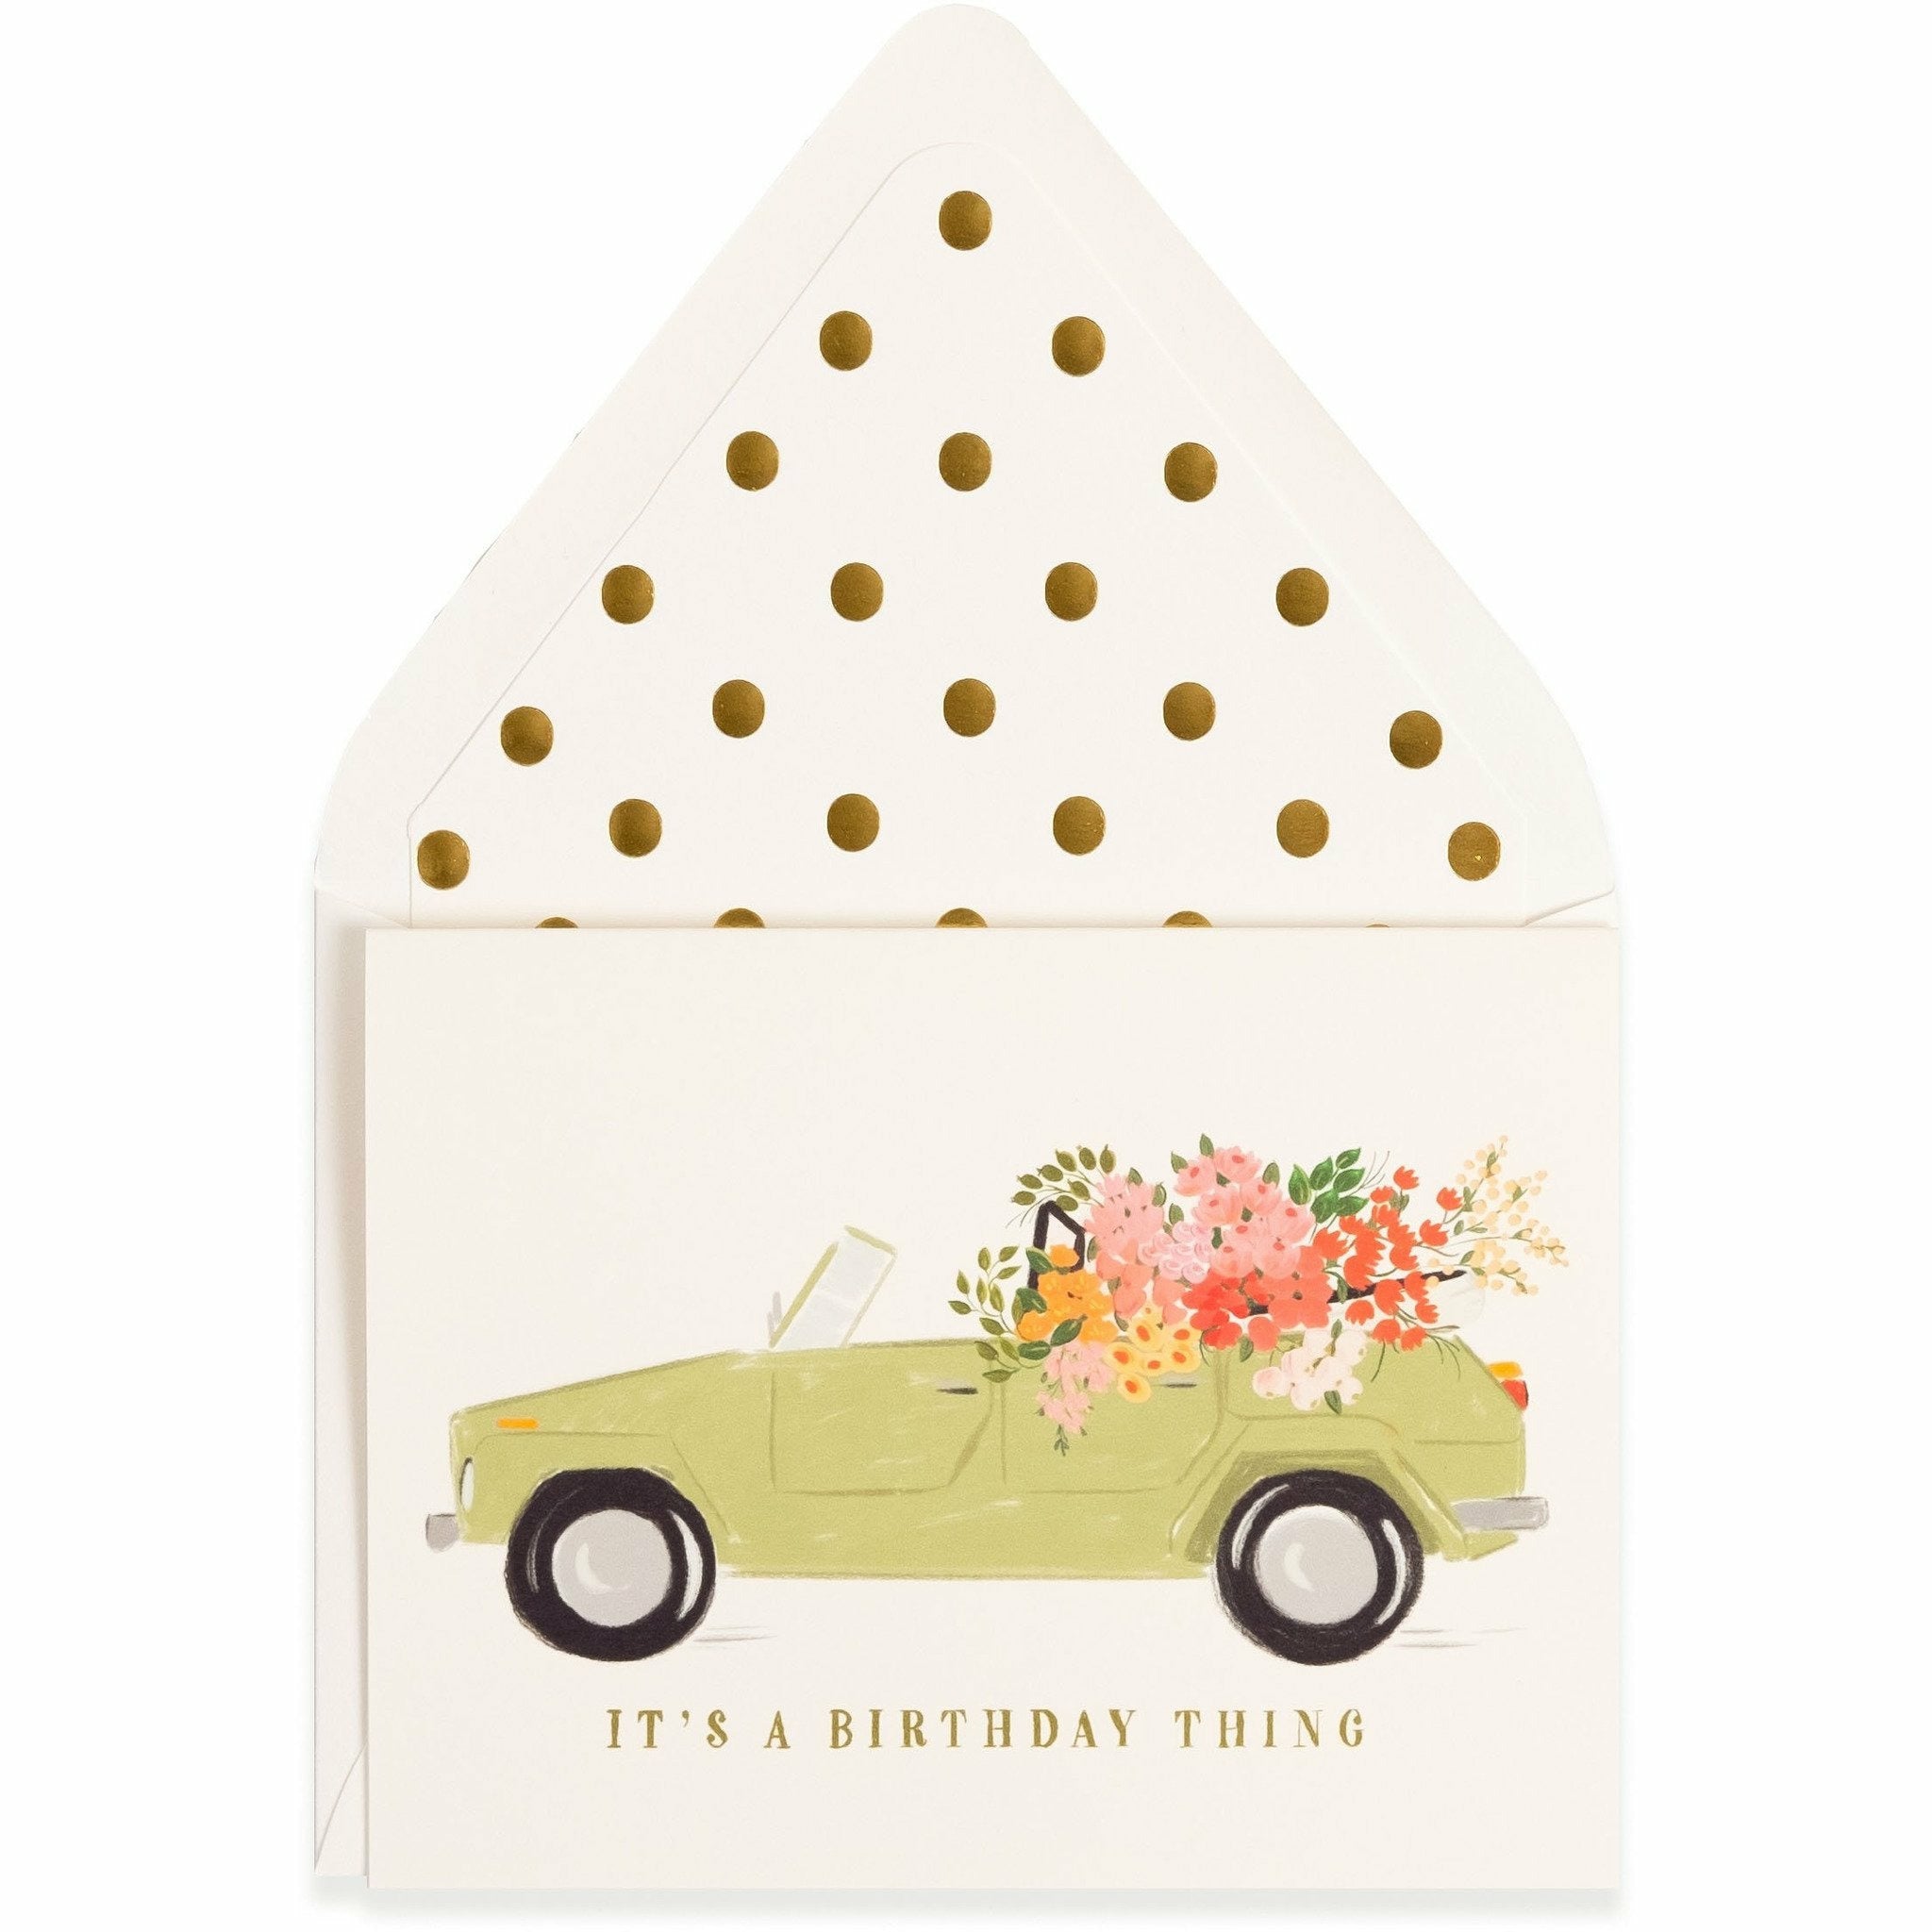 It's a Birhtday Thing Birthday Card with Gold and Cream Envelope - The First Snow